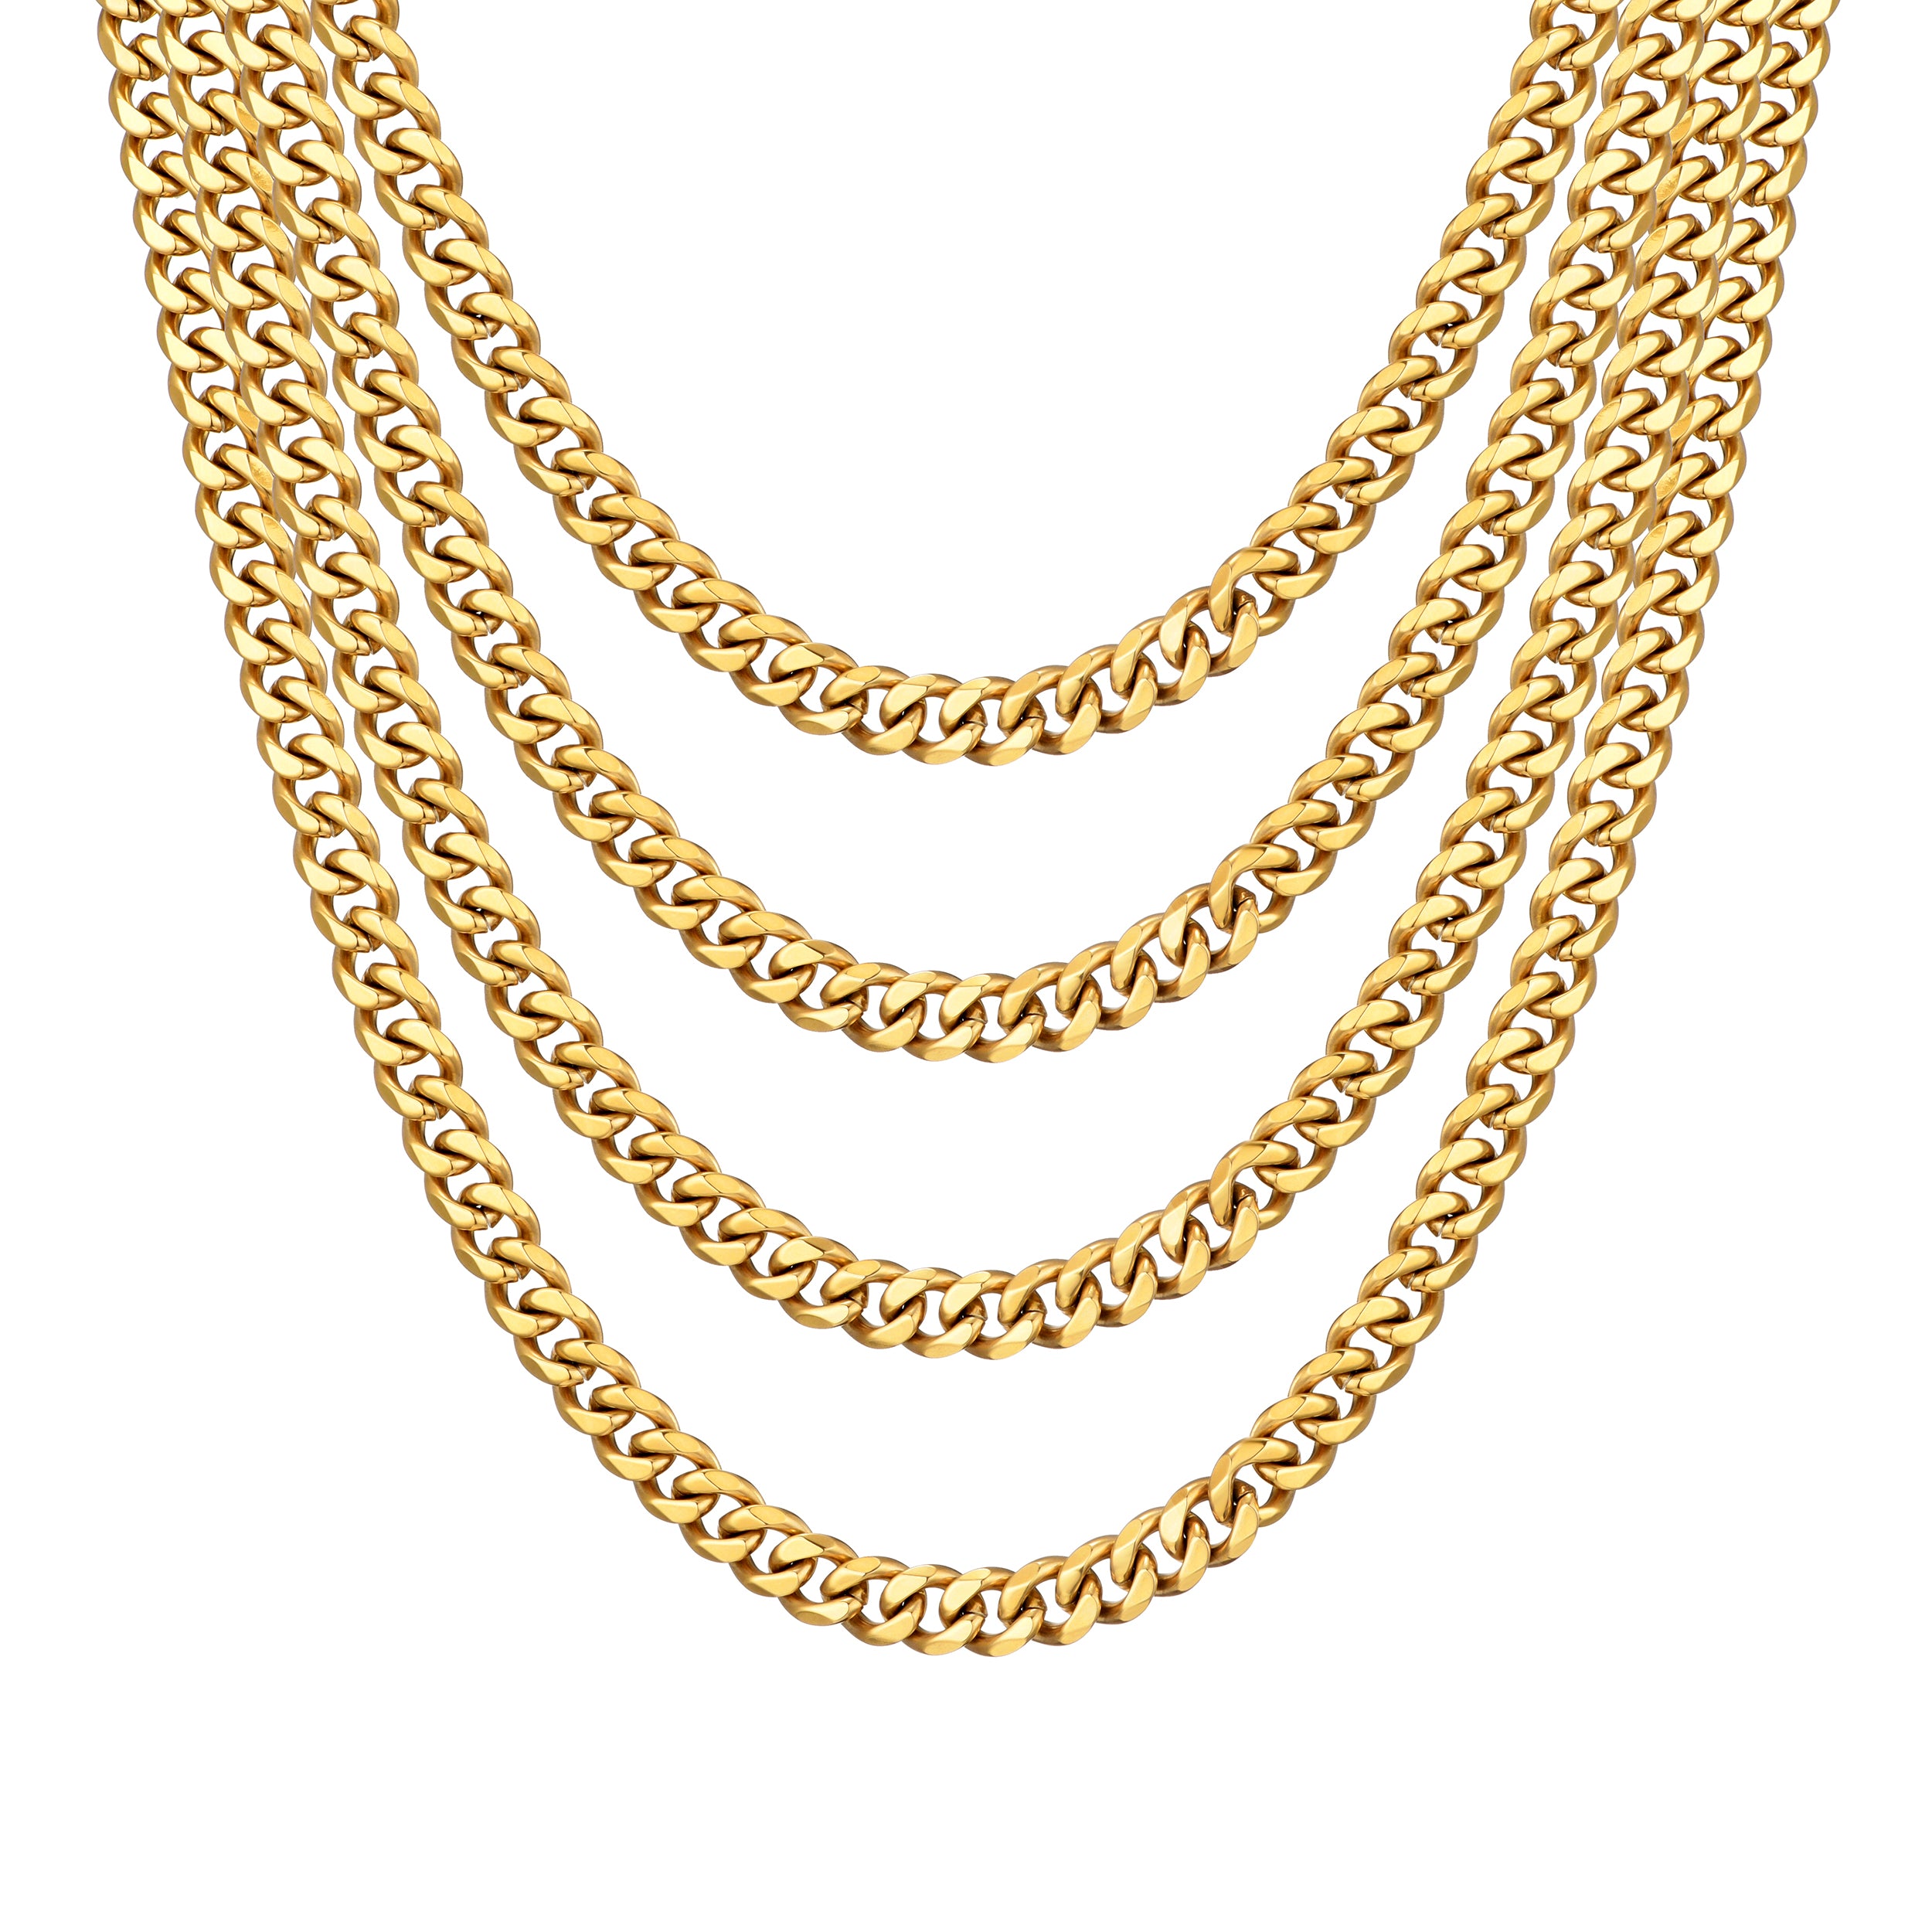 Men's 9mm Gold Plated Steel 18-24 Inch Curb Chain Necklace by Philip Jones Jewellery